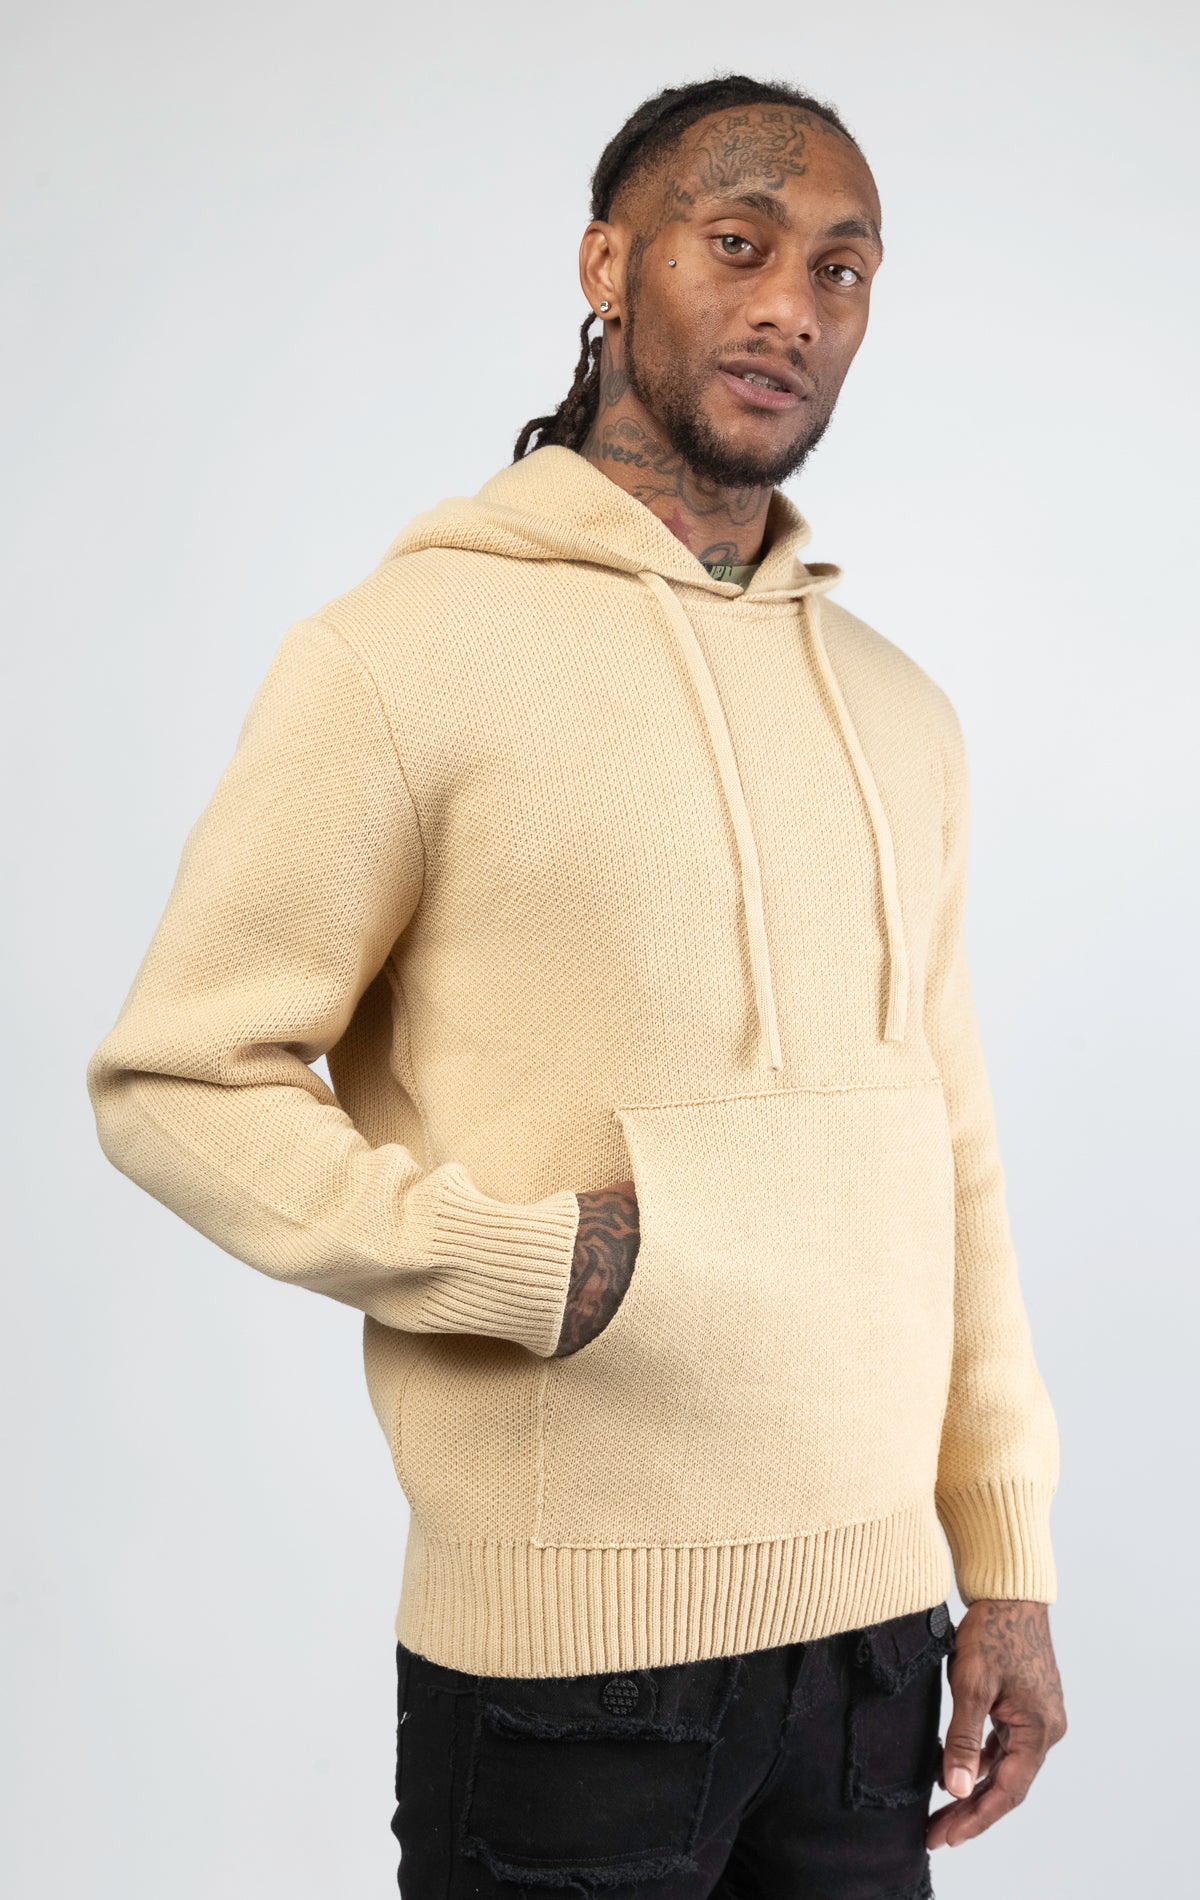 A stylish and comfortable Knitted Jersey Hooded Sweater in sand color, featuring a relaxed fit, a hood, and luxuriously soft knitted jersey fabric.